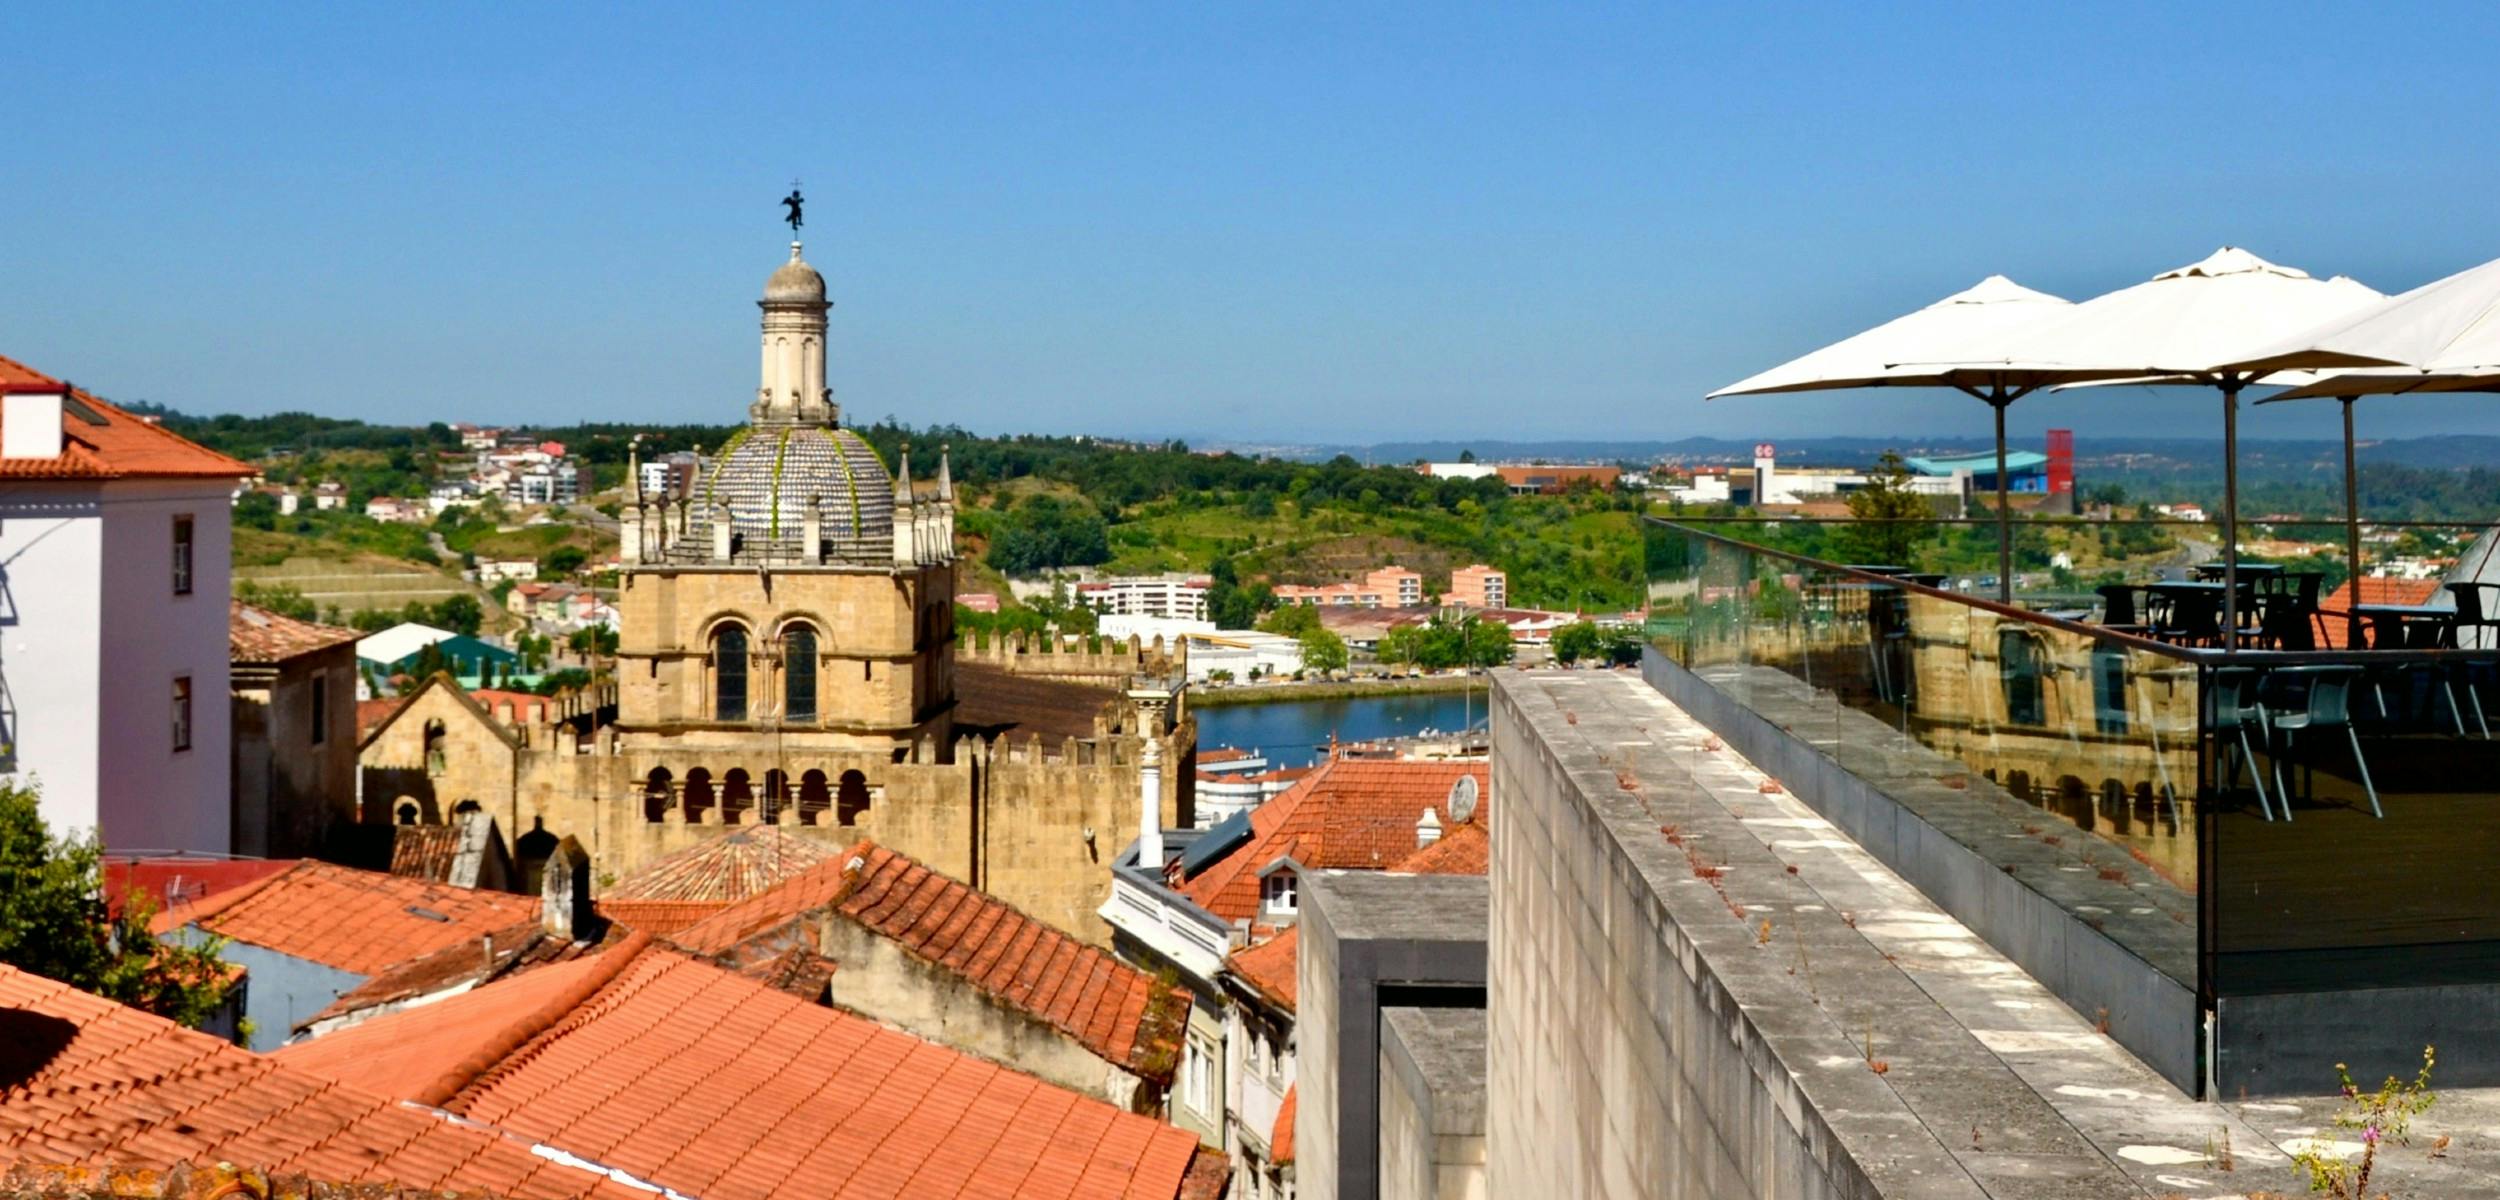 Self guided discovery walk of Coimbra's cathedrals and Calla Lilies Musement